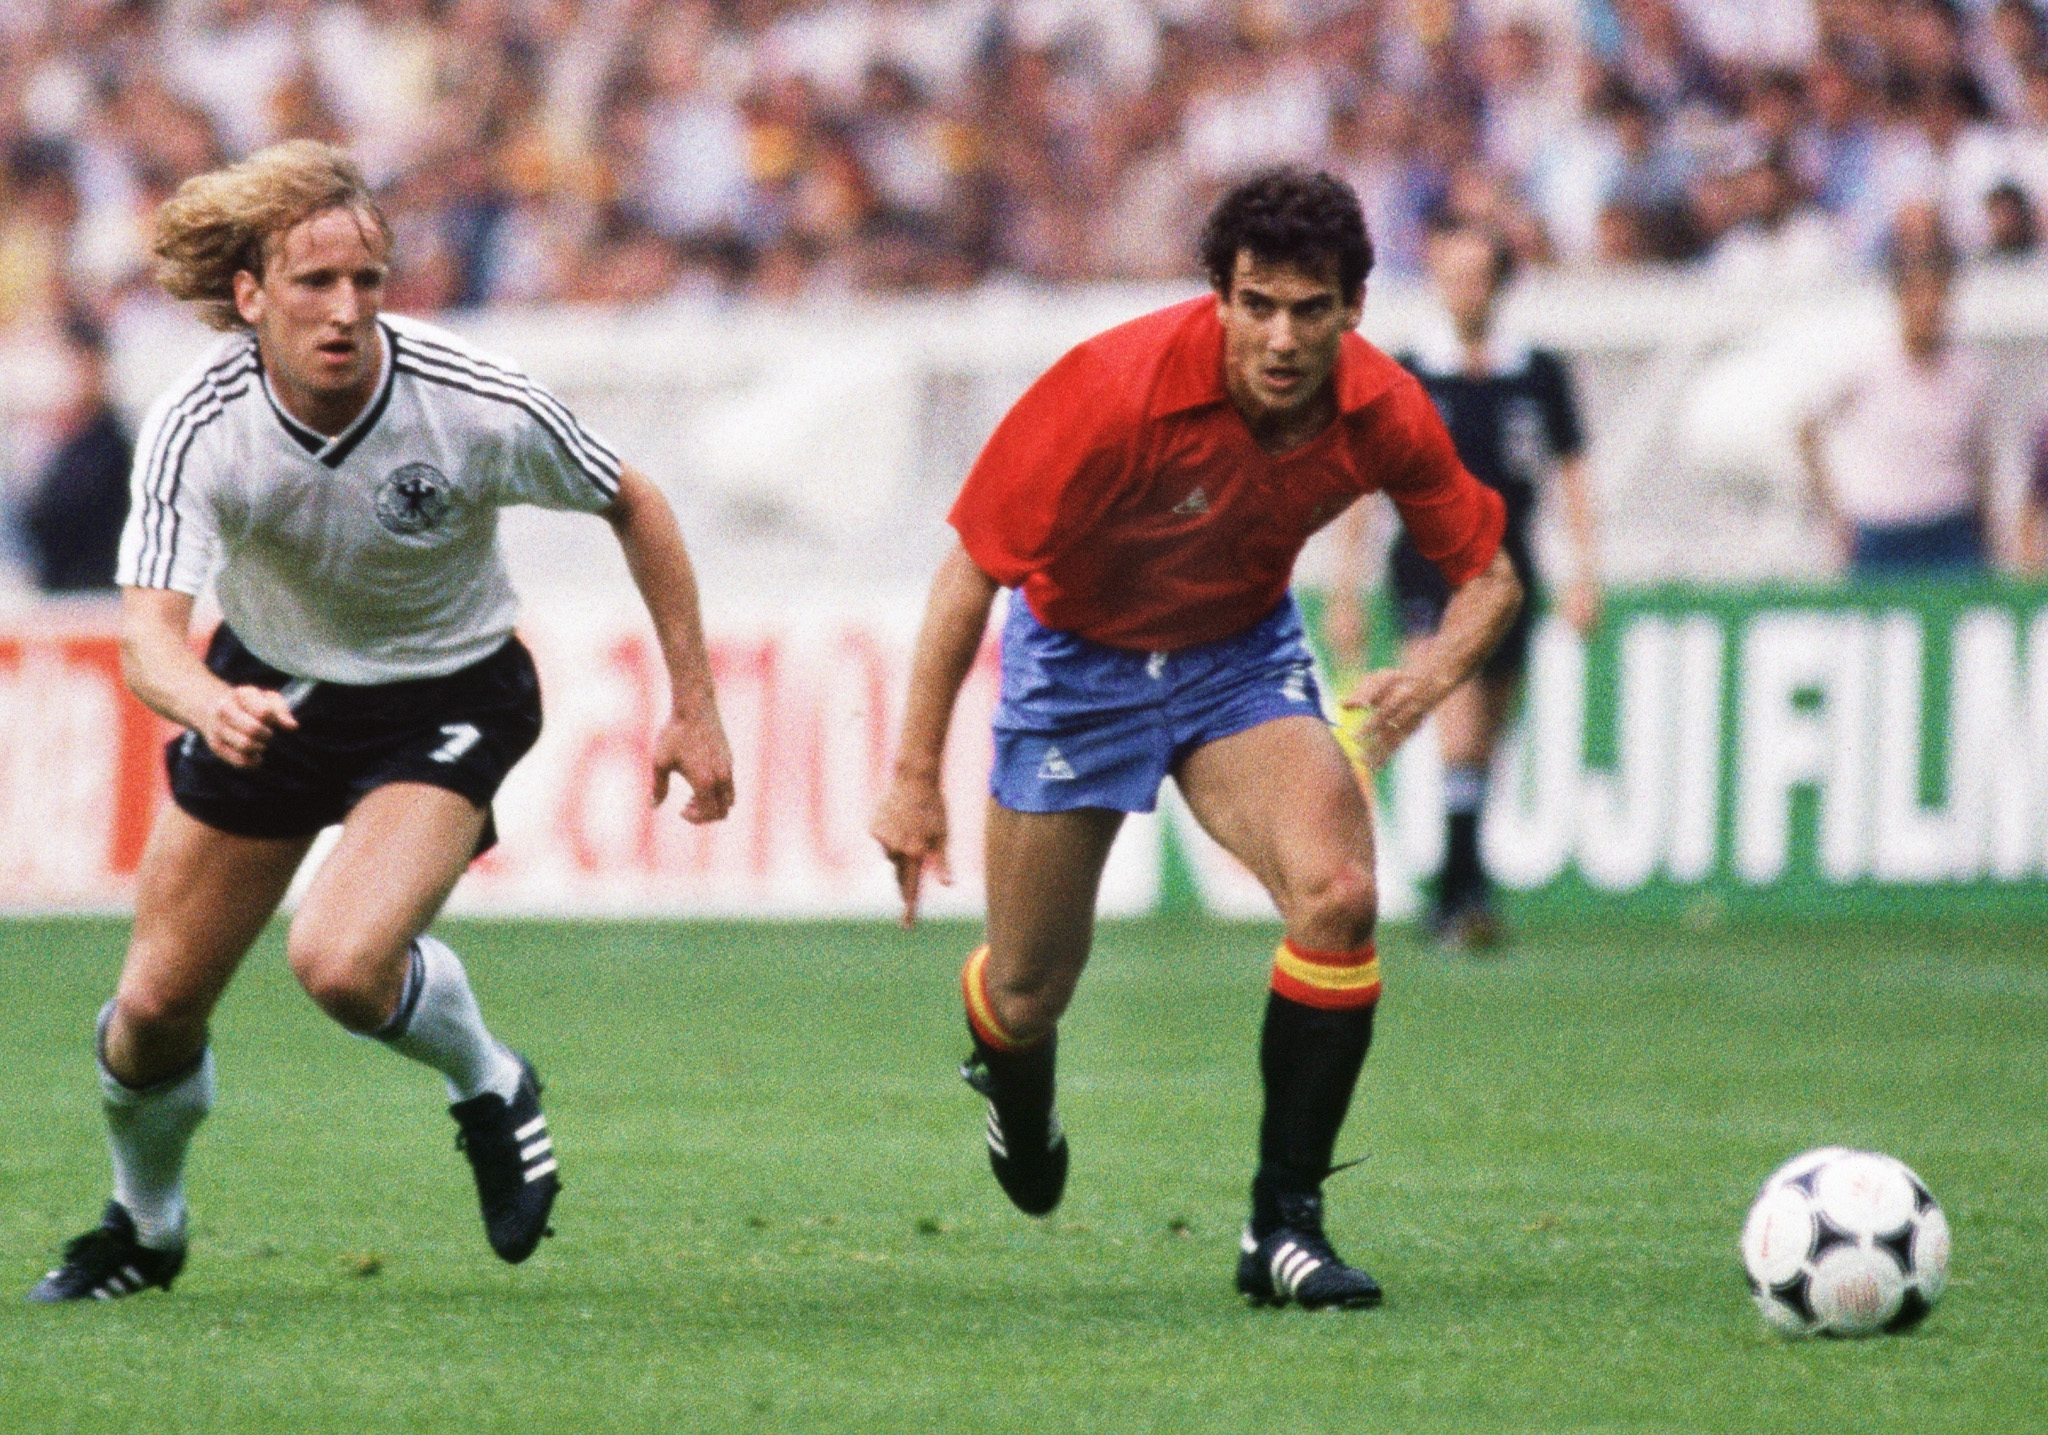 West Germany's Andreas Brehme and Spain's Juan Señor run after the ball in a game at Euro 1984.